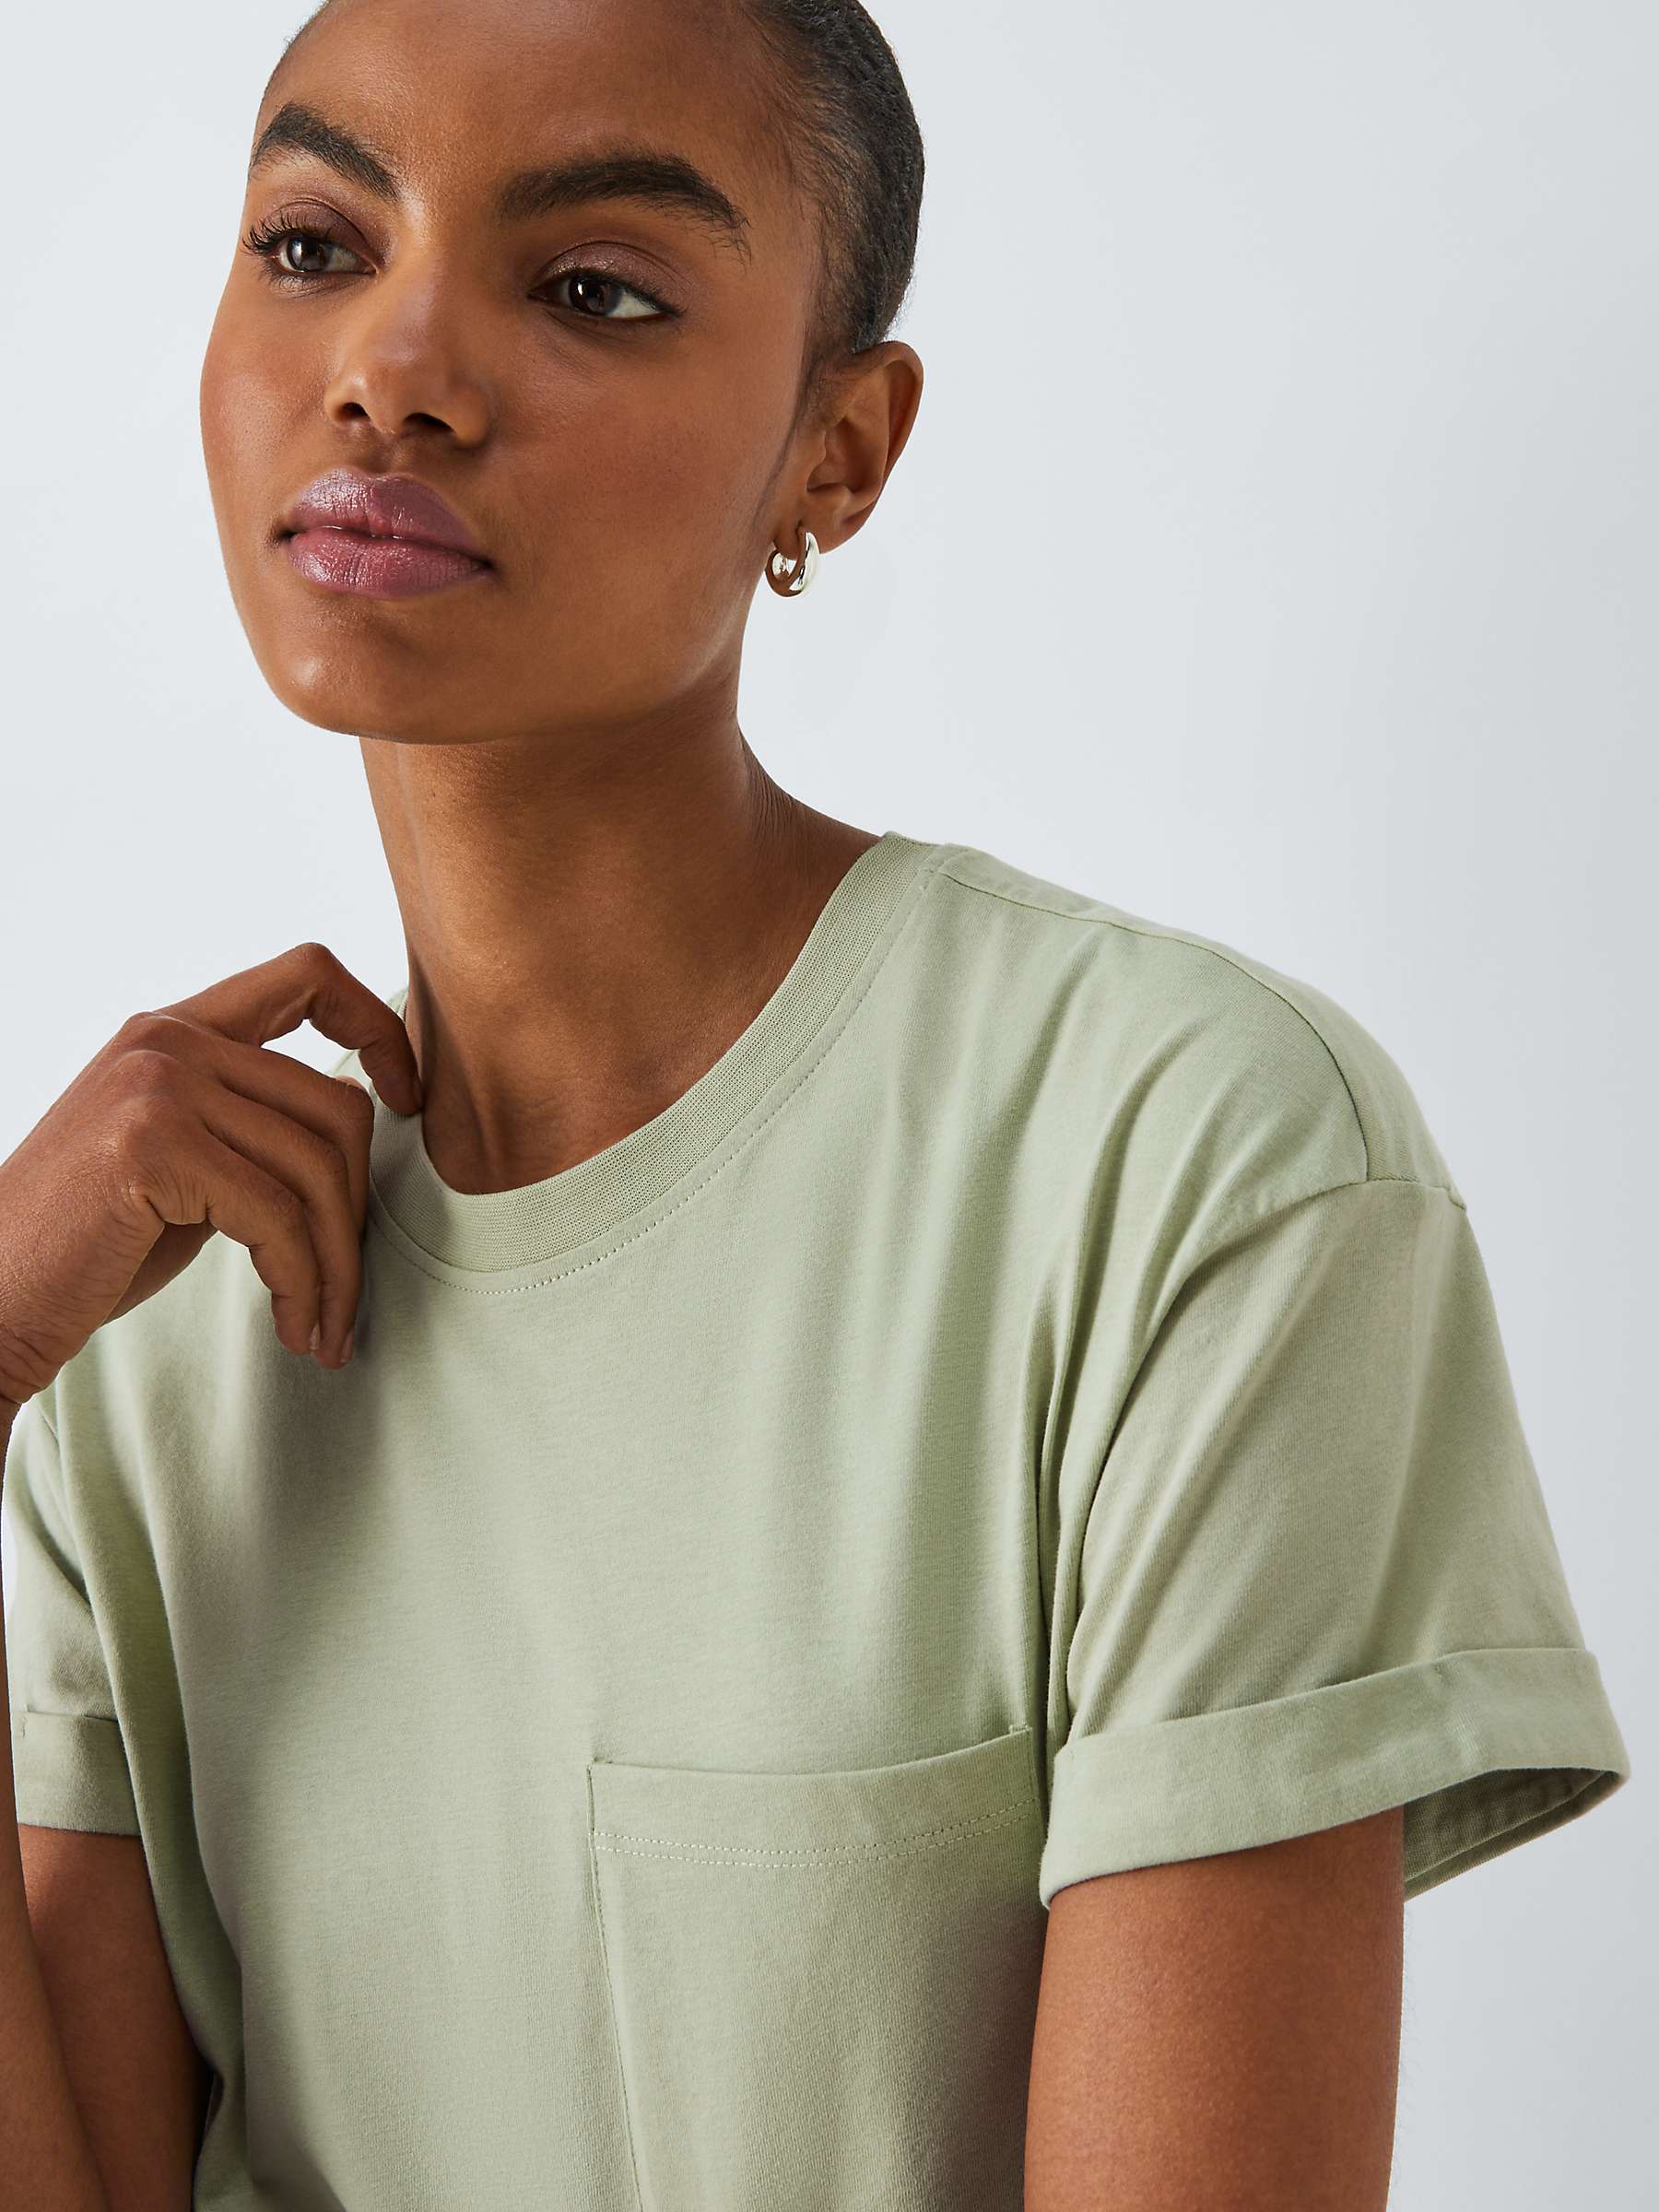 Buy John Lewis ANYDAY Relax Pocket Tee Online at johnlewis.com